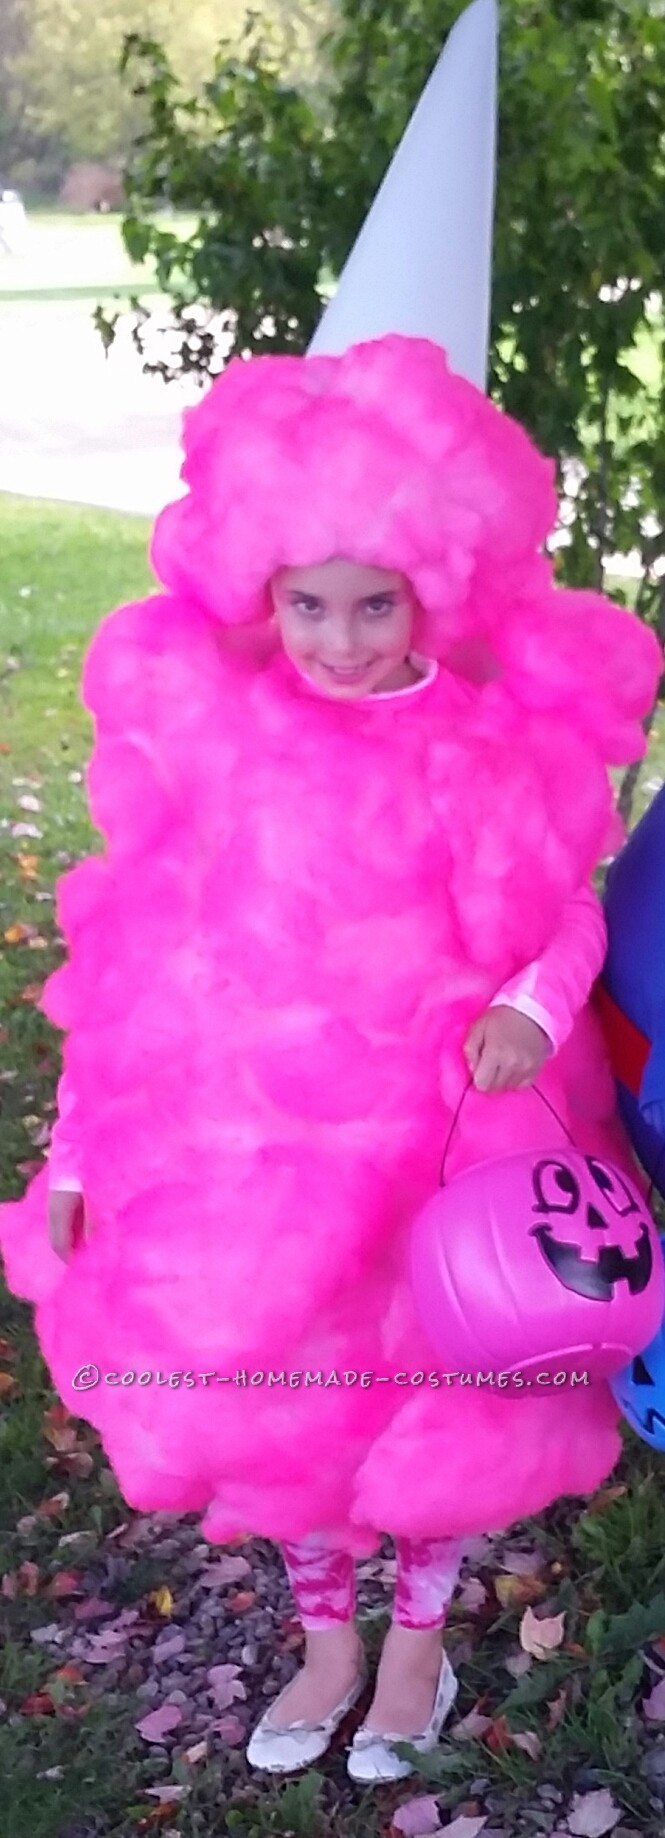 Cool Pink Cotton Candy Costume for a Girl